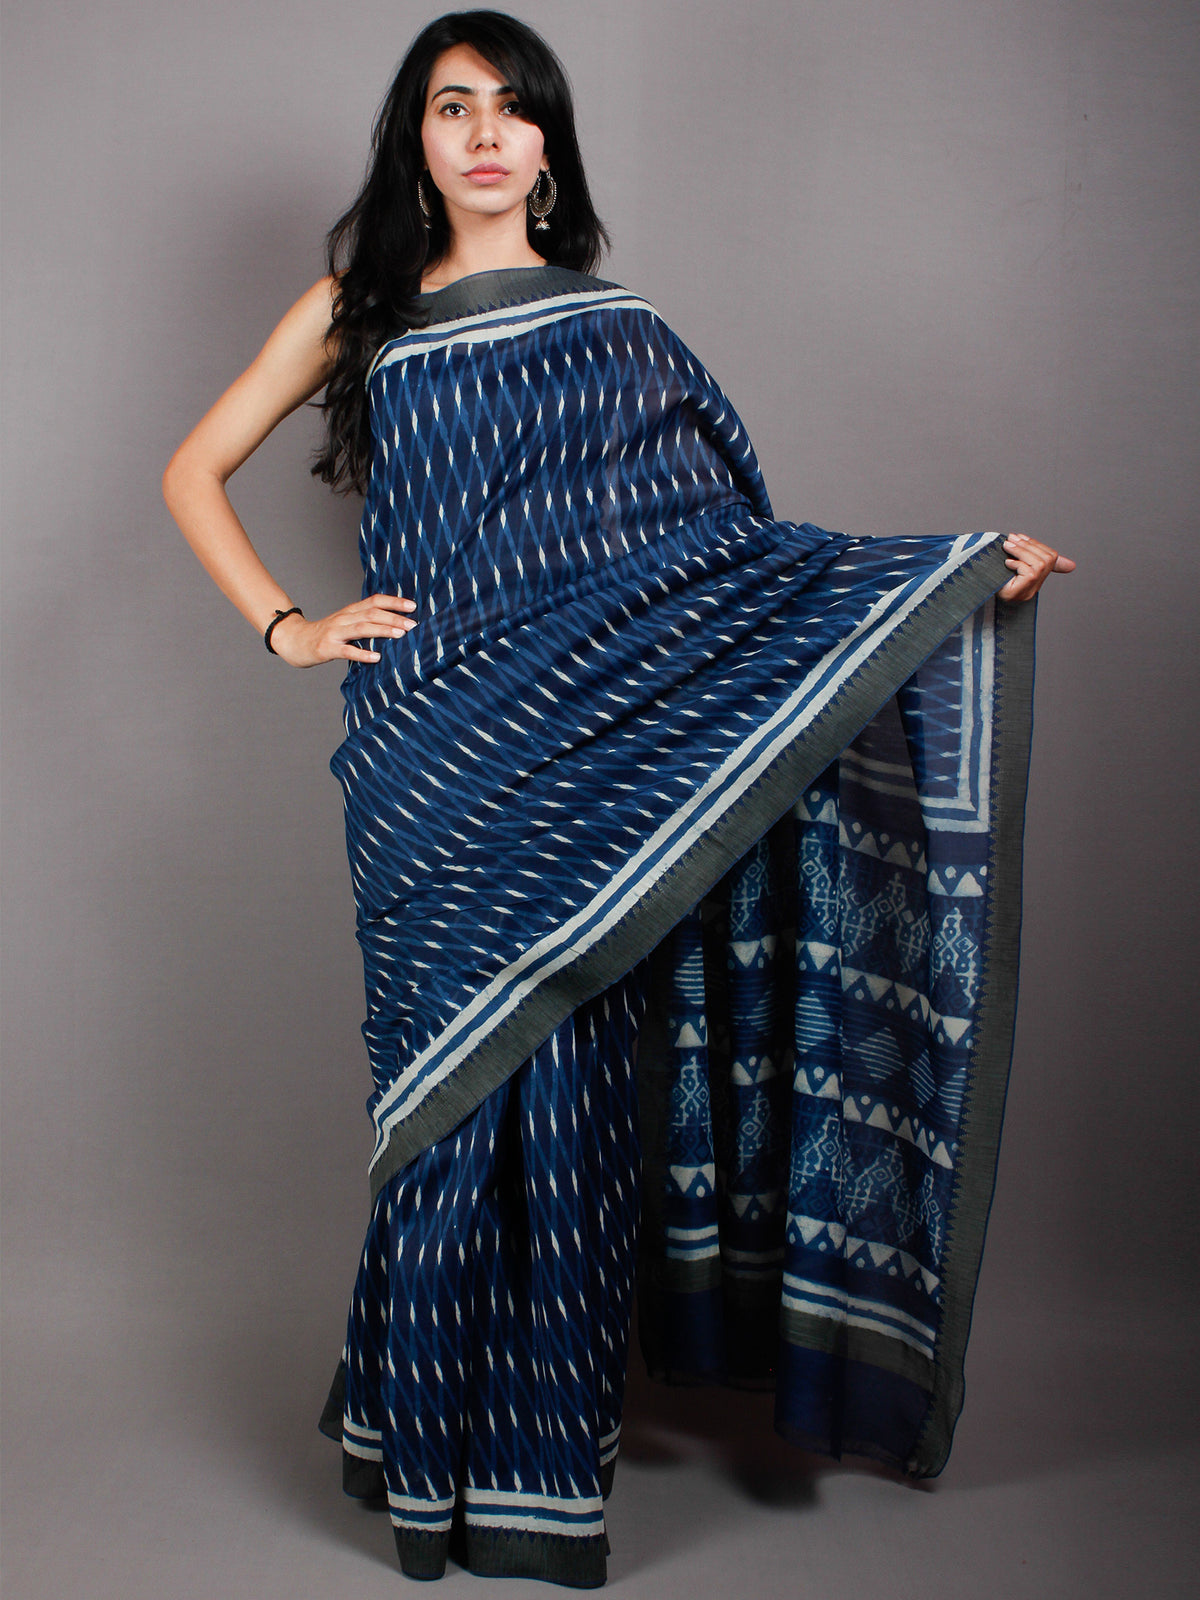 Indigo Ivory White Hand Block Printed in Natural Vegetable Colors Chanderi Saree With Geecha Border - S03170505